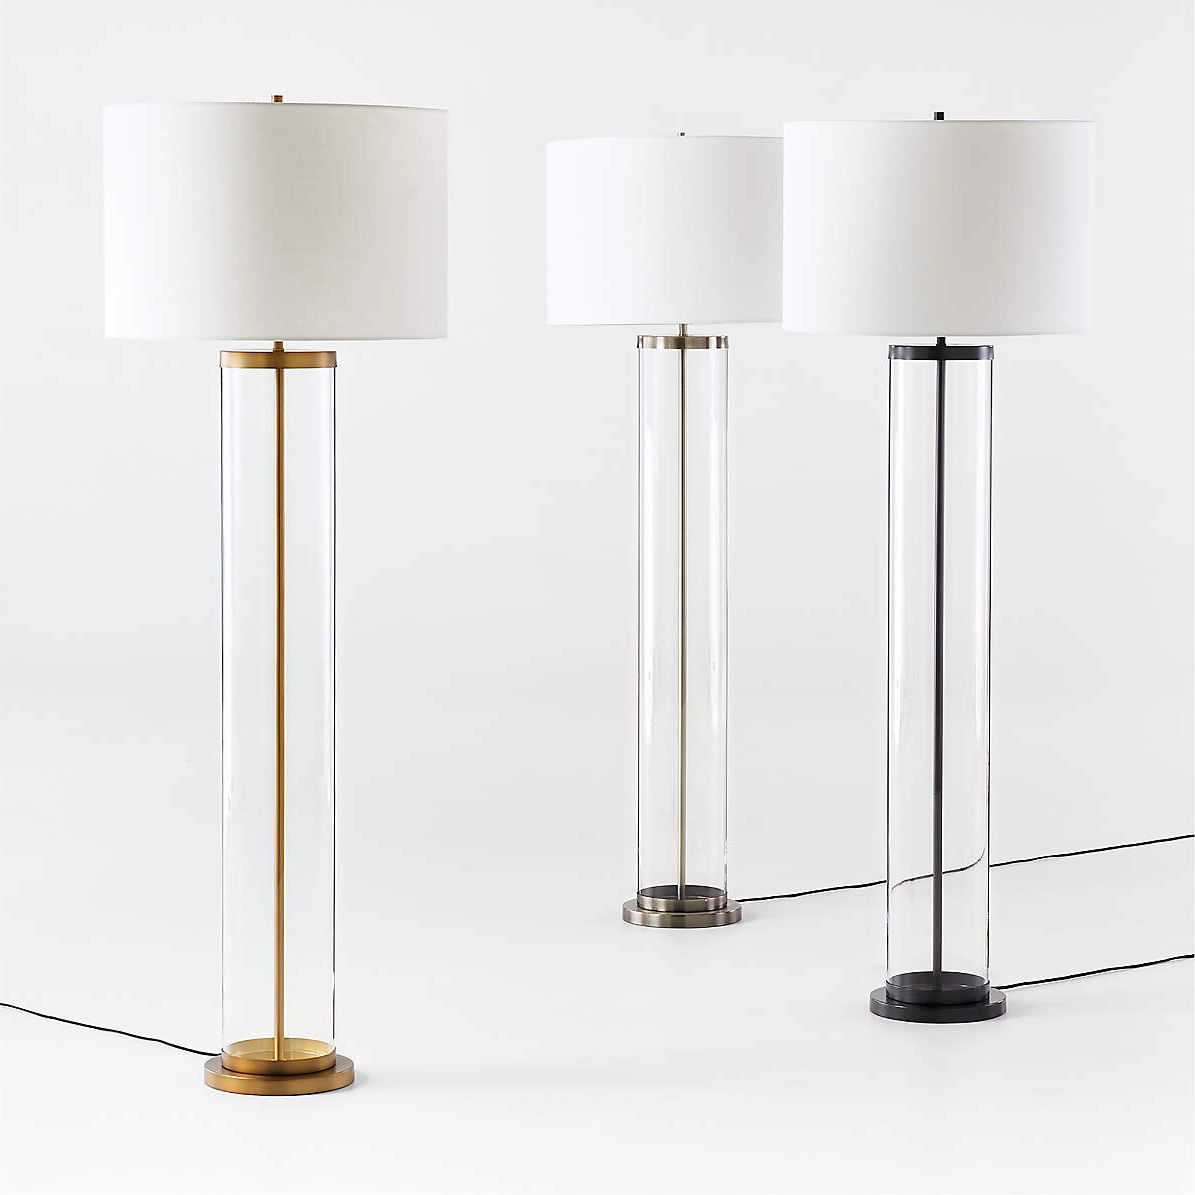 Crate & Barrel In Well Known Acrylic Floor Lamps (View 6 of 15)